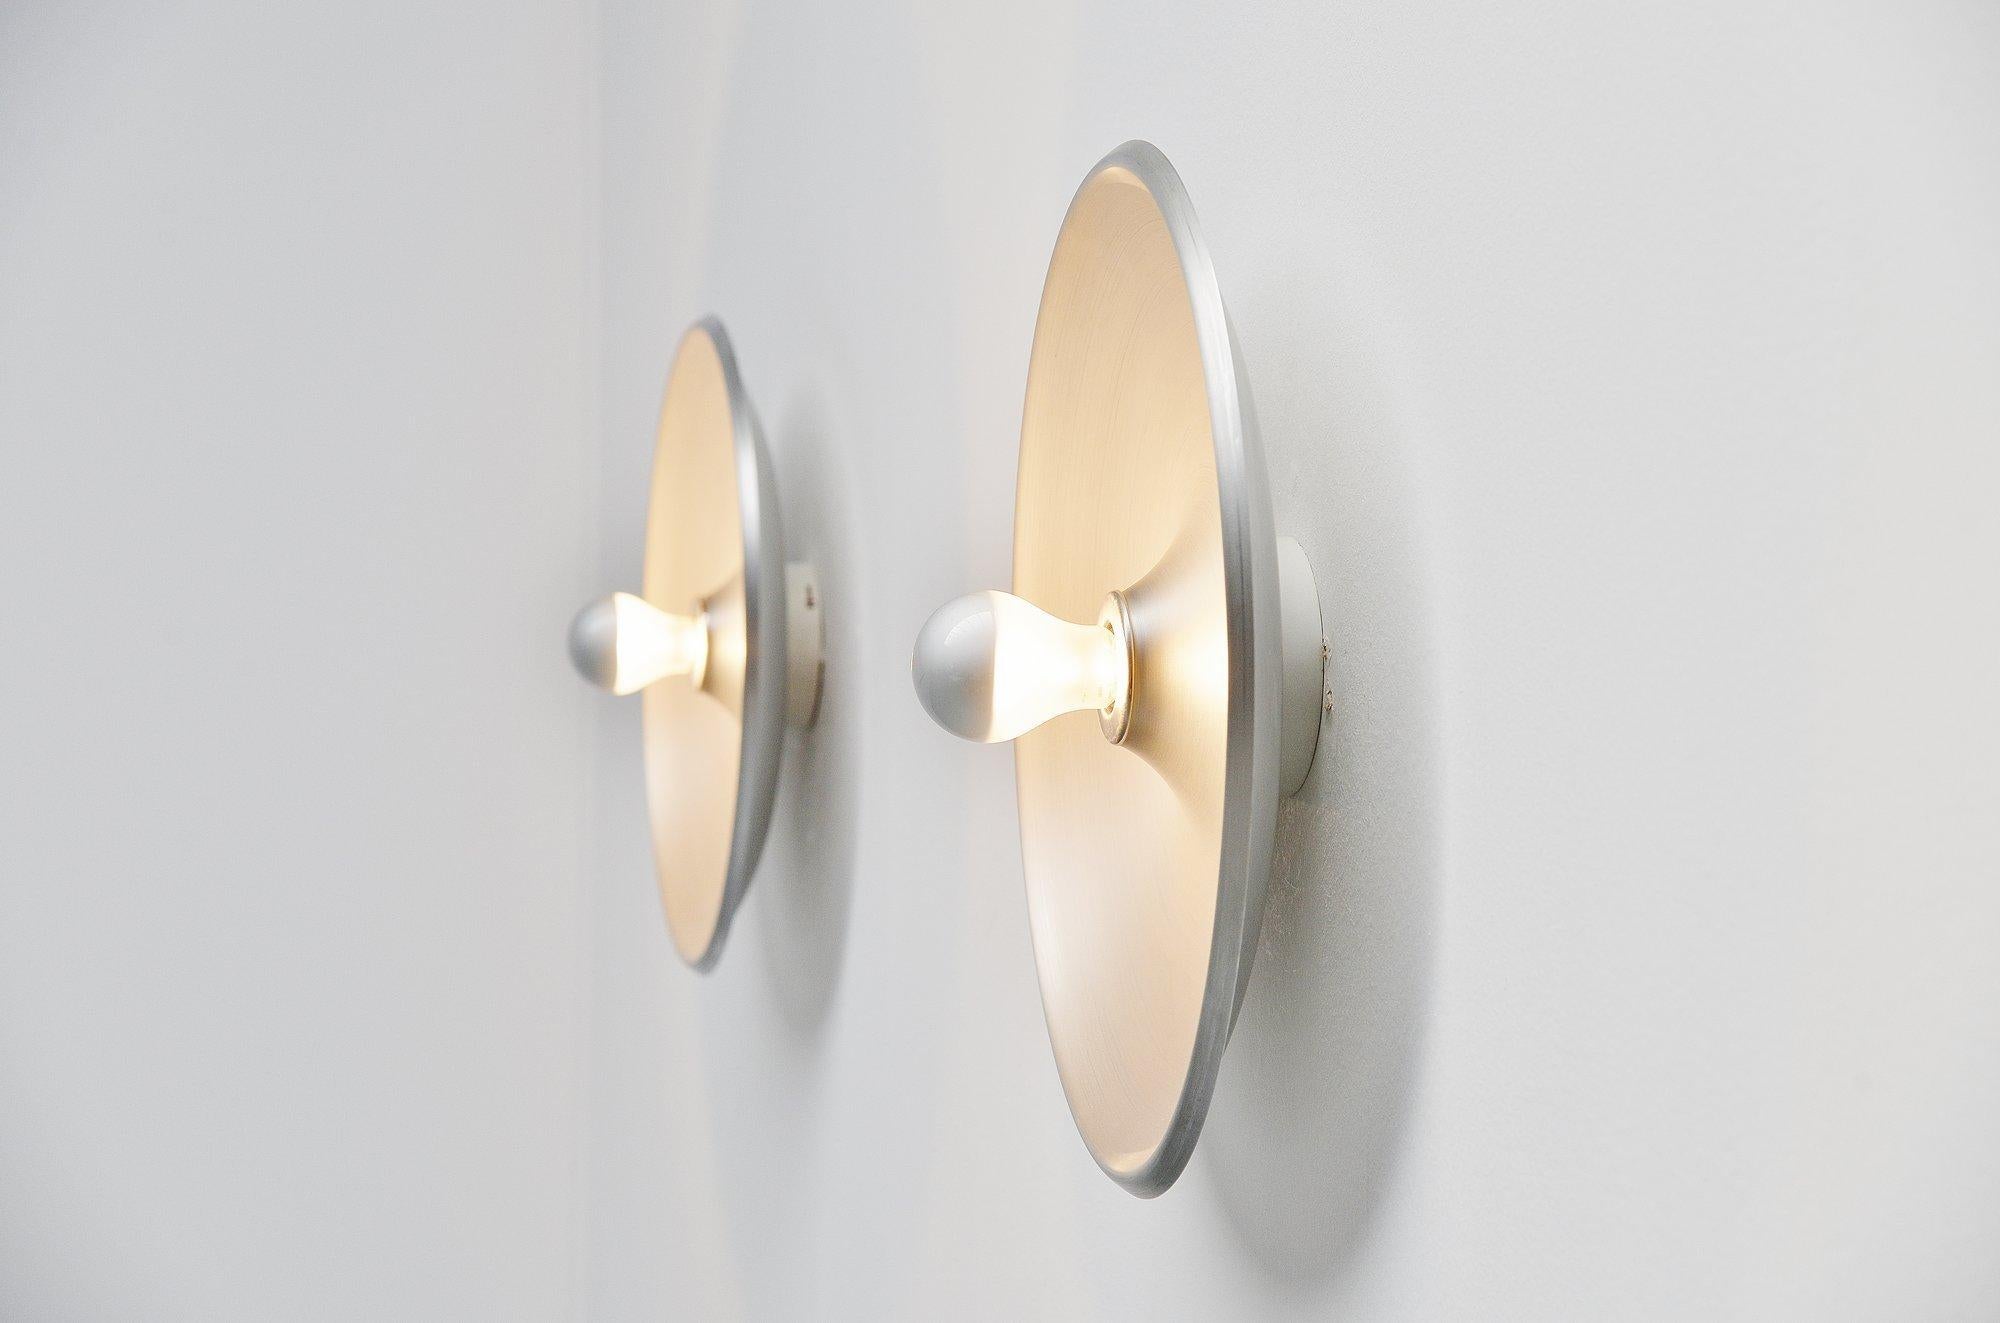 Fantastic pair of large wall/ceiling lamps model 262 designed by Gino Sarfatti, Italy 1971. This pair of wall lamps has an aluminum round shade which reflects the light very nicely when lit. The lamps are marked with the Arteluce sticker on the